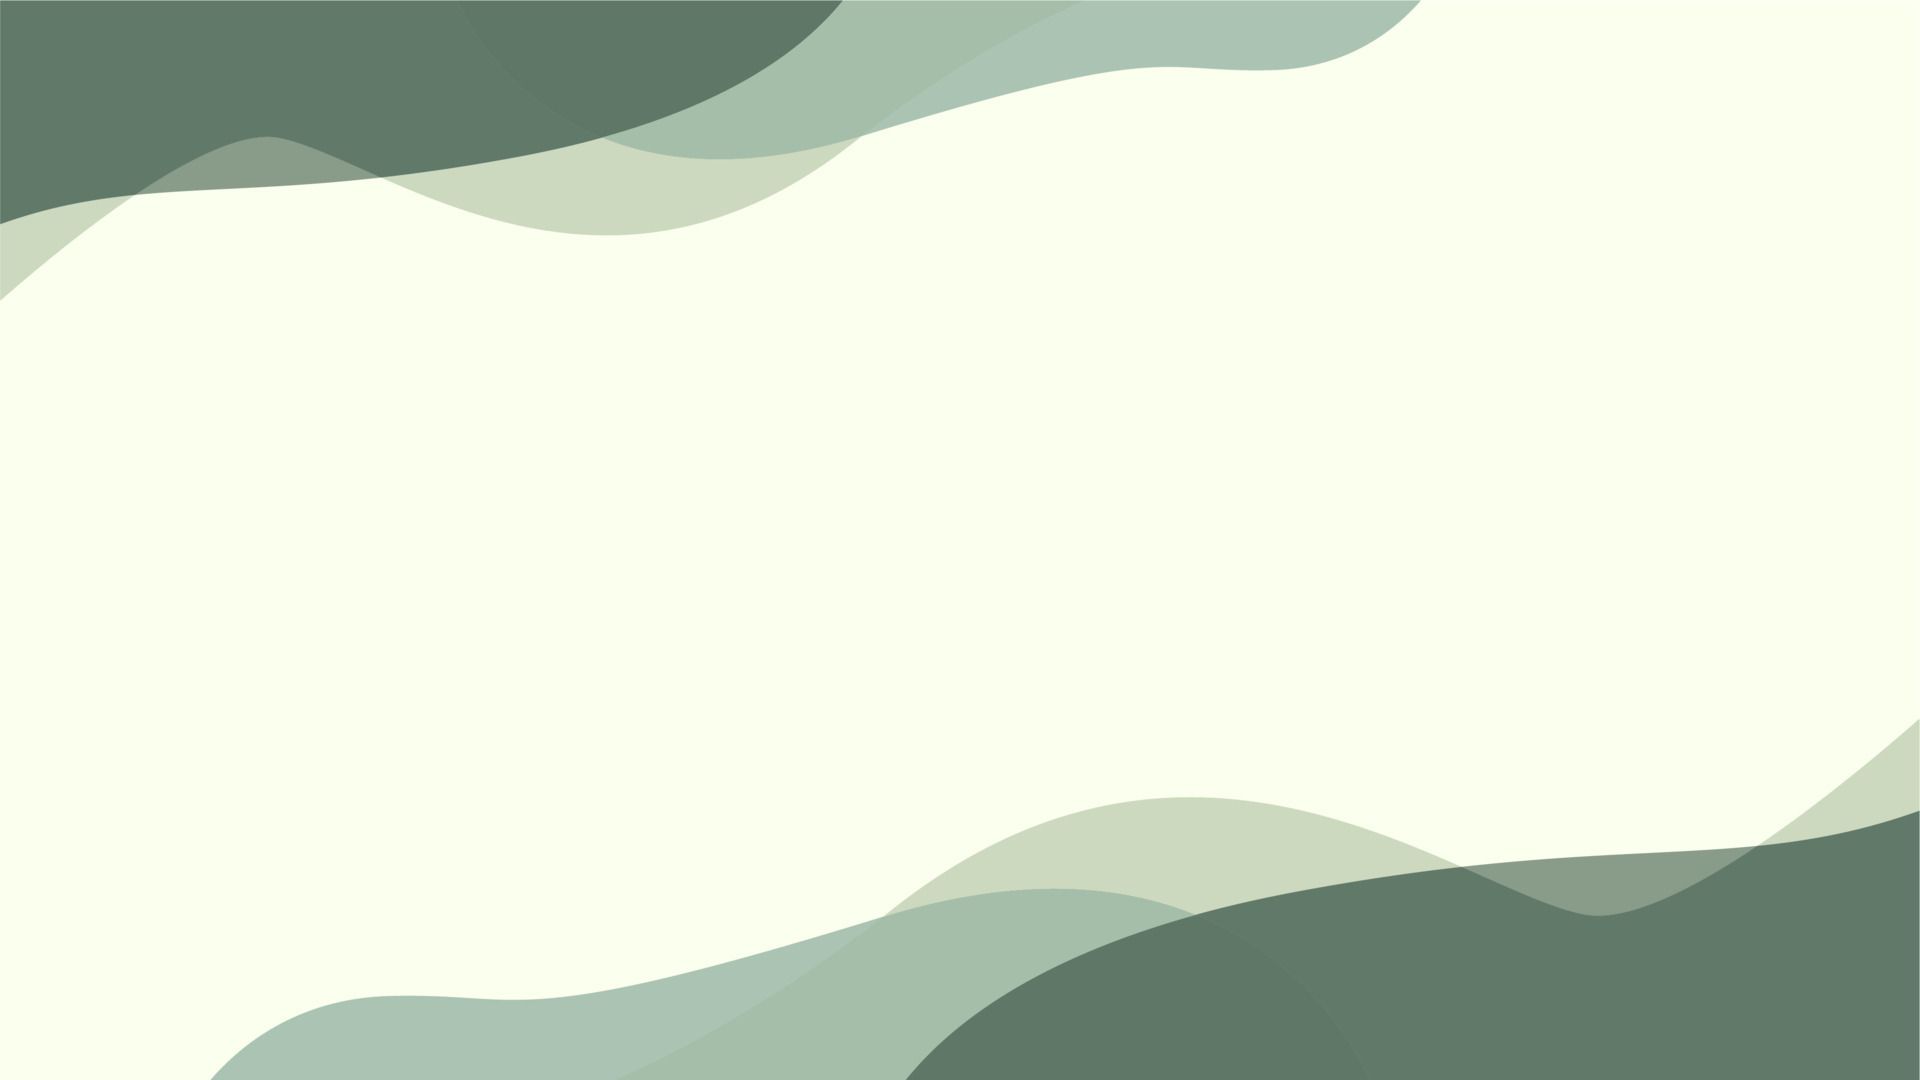 A green and white background with wavy lines - Green, sage green, vector